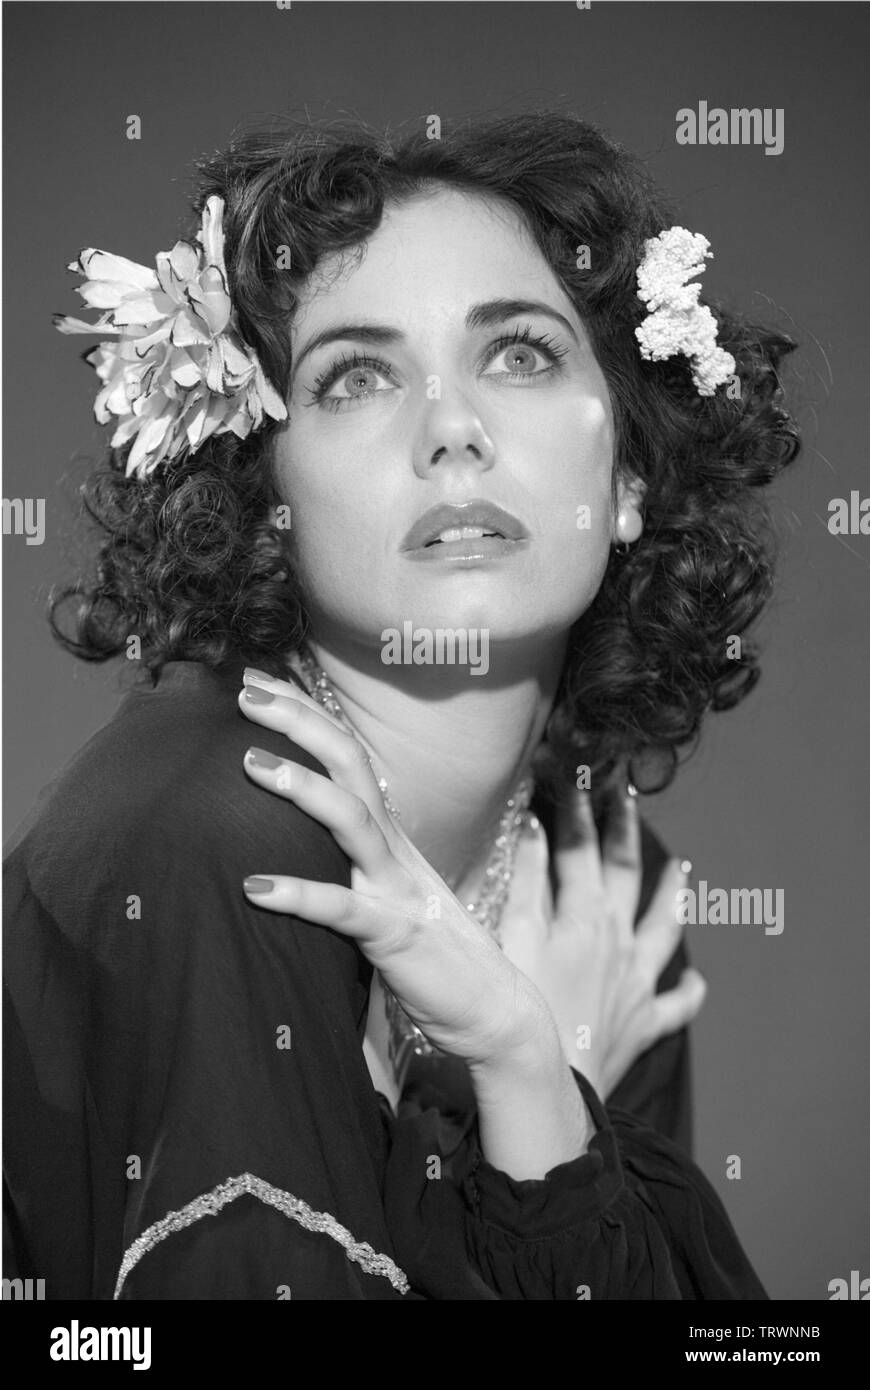 MIA KIRSHNER in THE BLACK DAHLIA (2006). Copyright: Editorial use only. No merchandising or book covers. This is a publicly distributed handout. Access rights only, no license of copyright provided. Only to be reproduced in conjunction with promotion of this film. Credit: UNIVERSAL PICTURES / KONOW, ROLF / Album Stock Photo